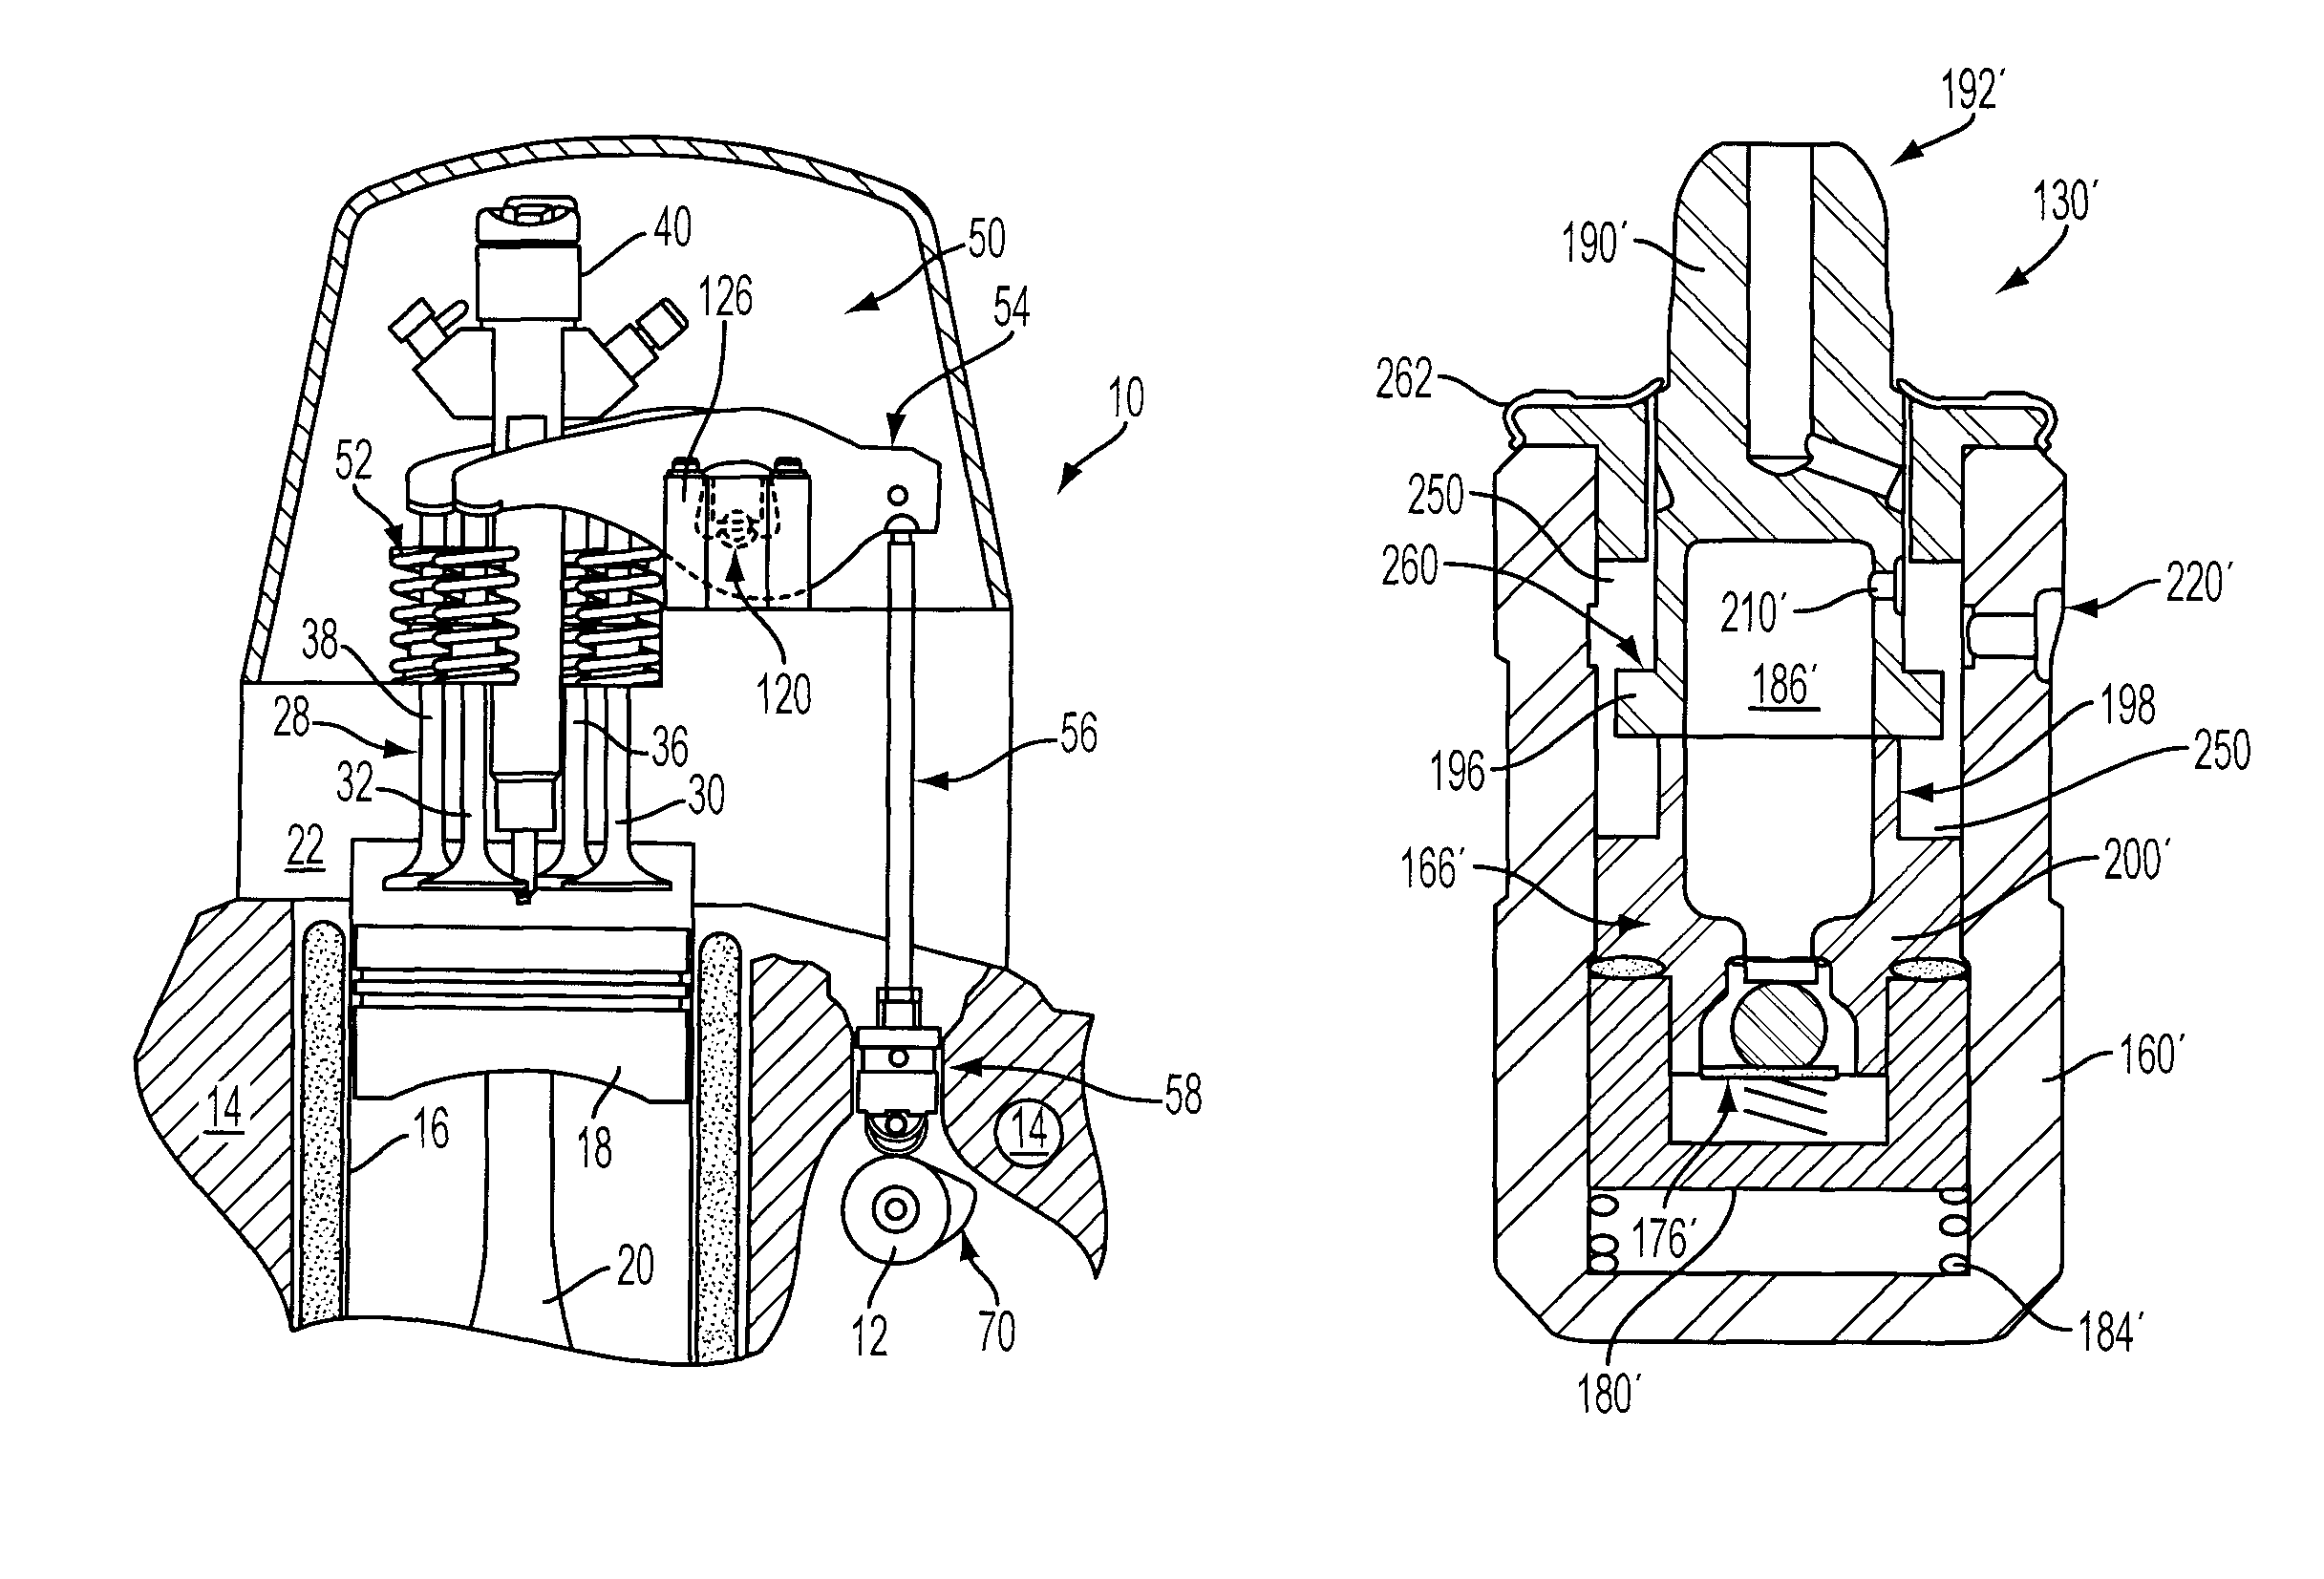 Hydraulic lash adjuster with damping device